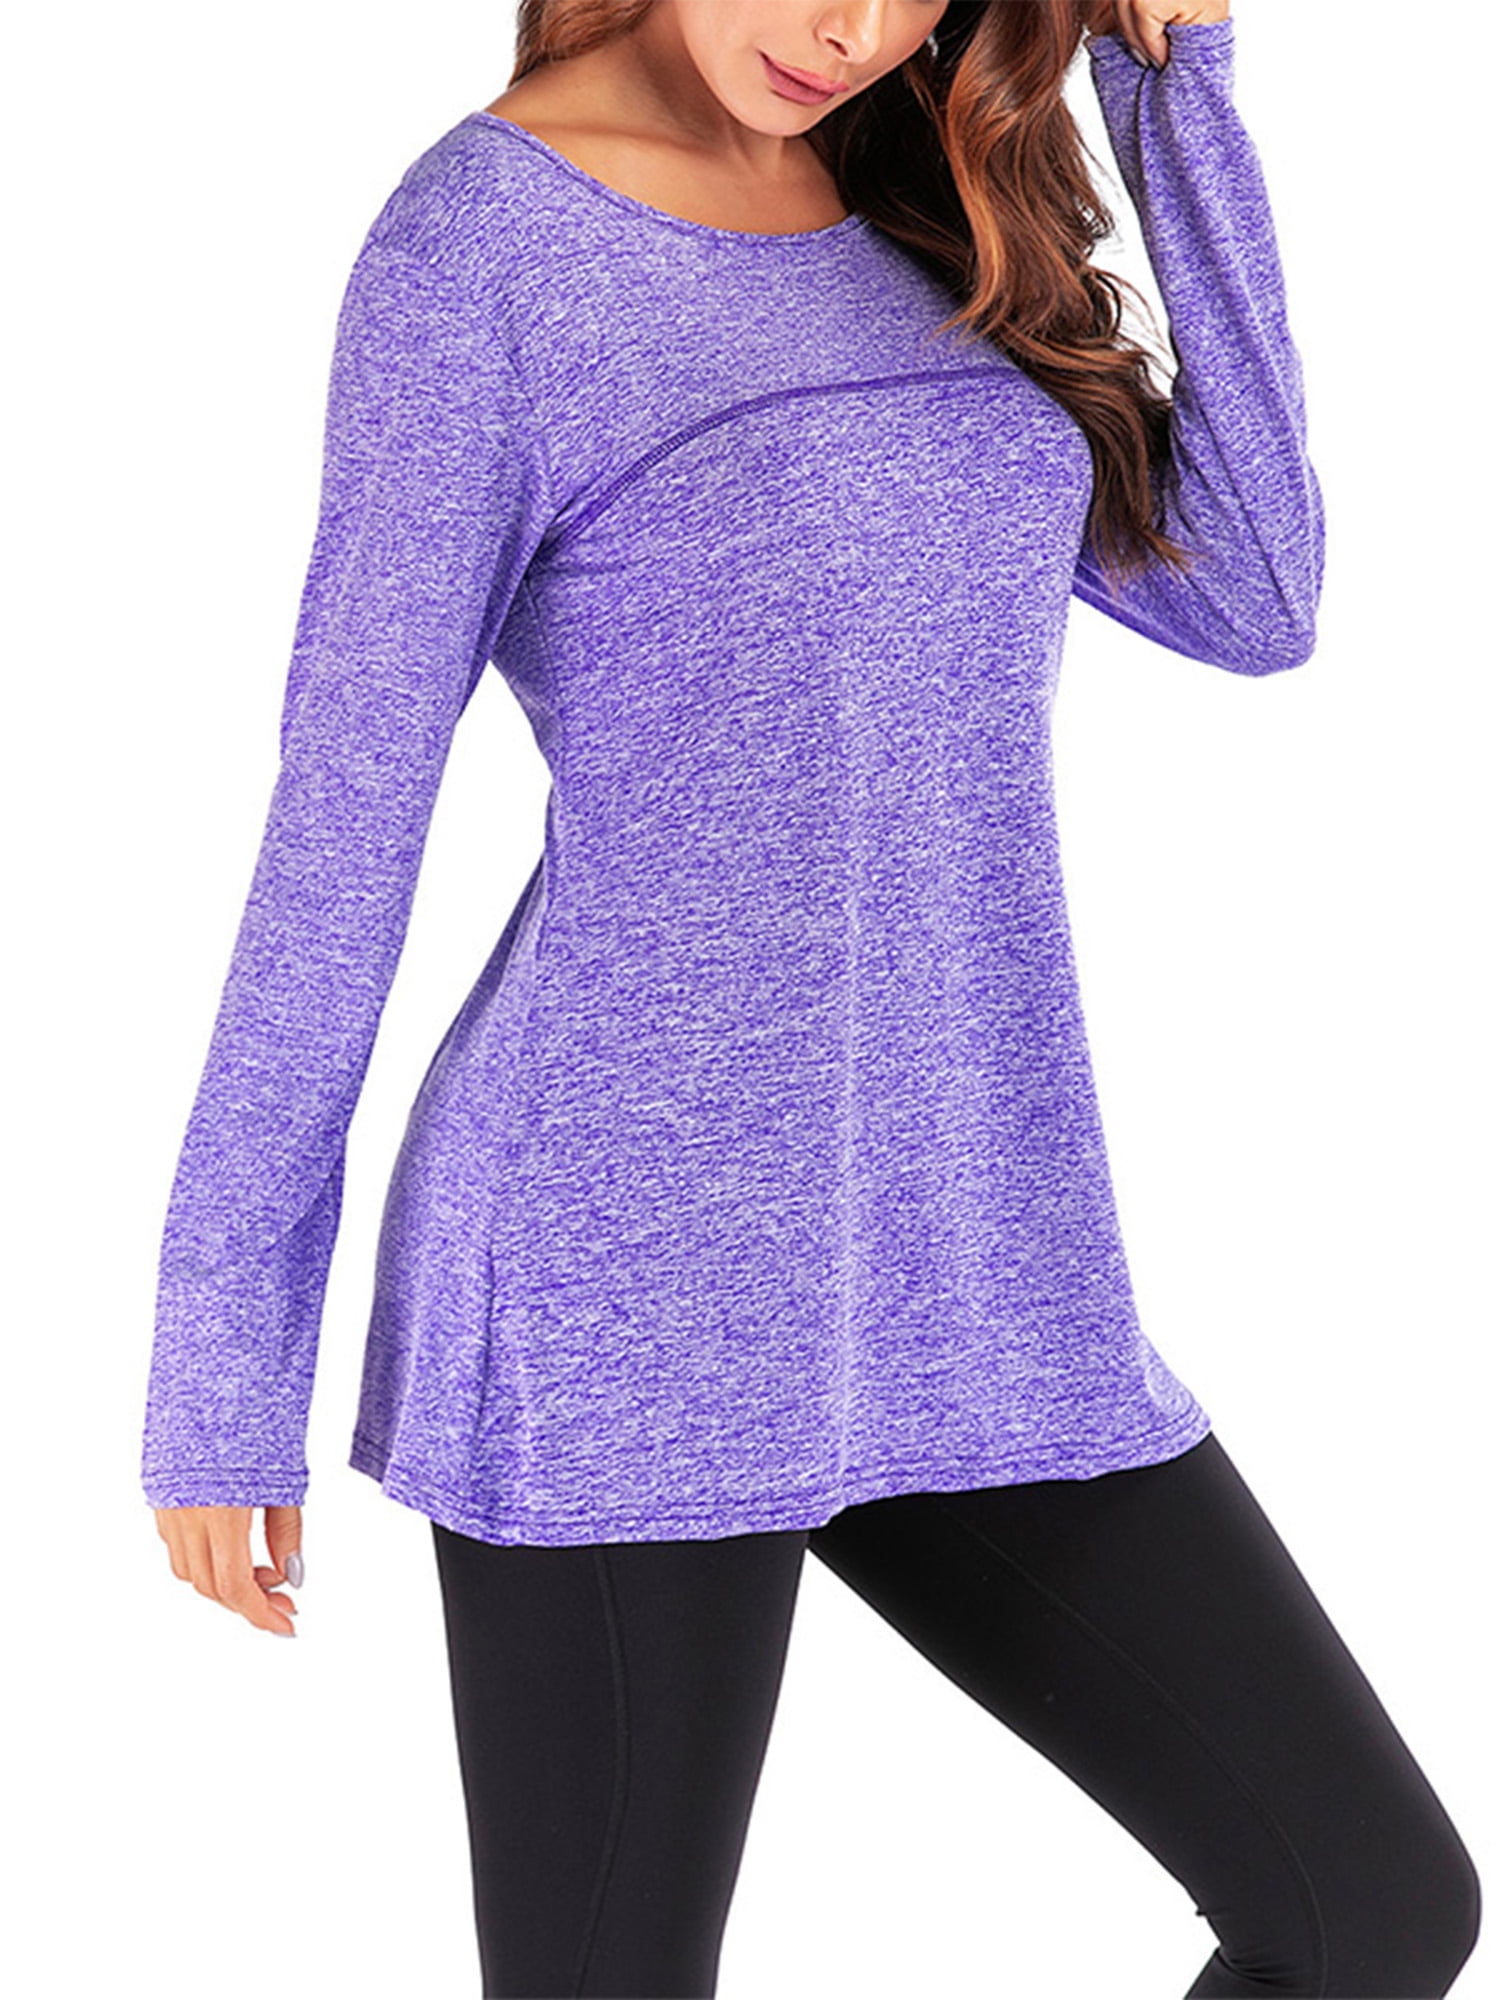 ZEALOTPOWER Women Yoga Tops Loose Fit Long Sleeves Workout Shirts Pullover Athletic